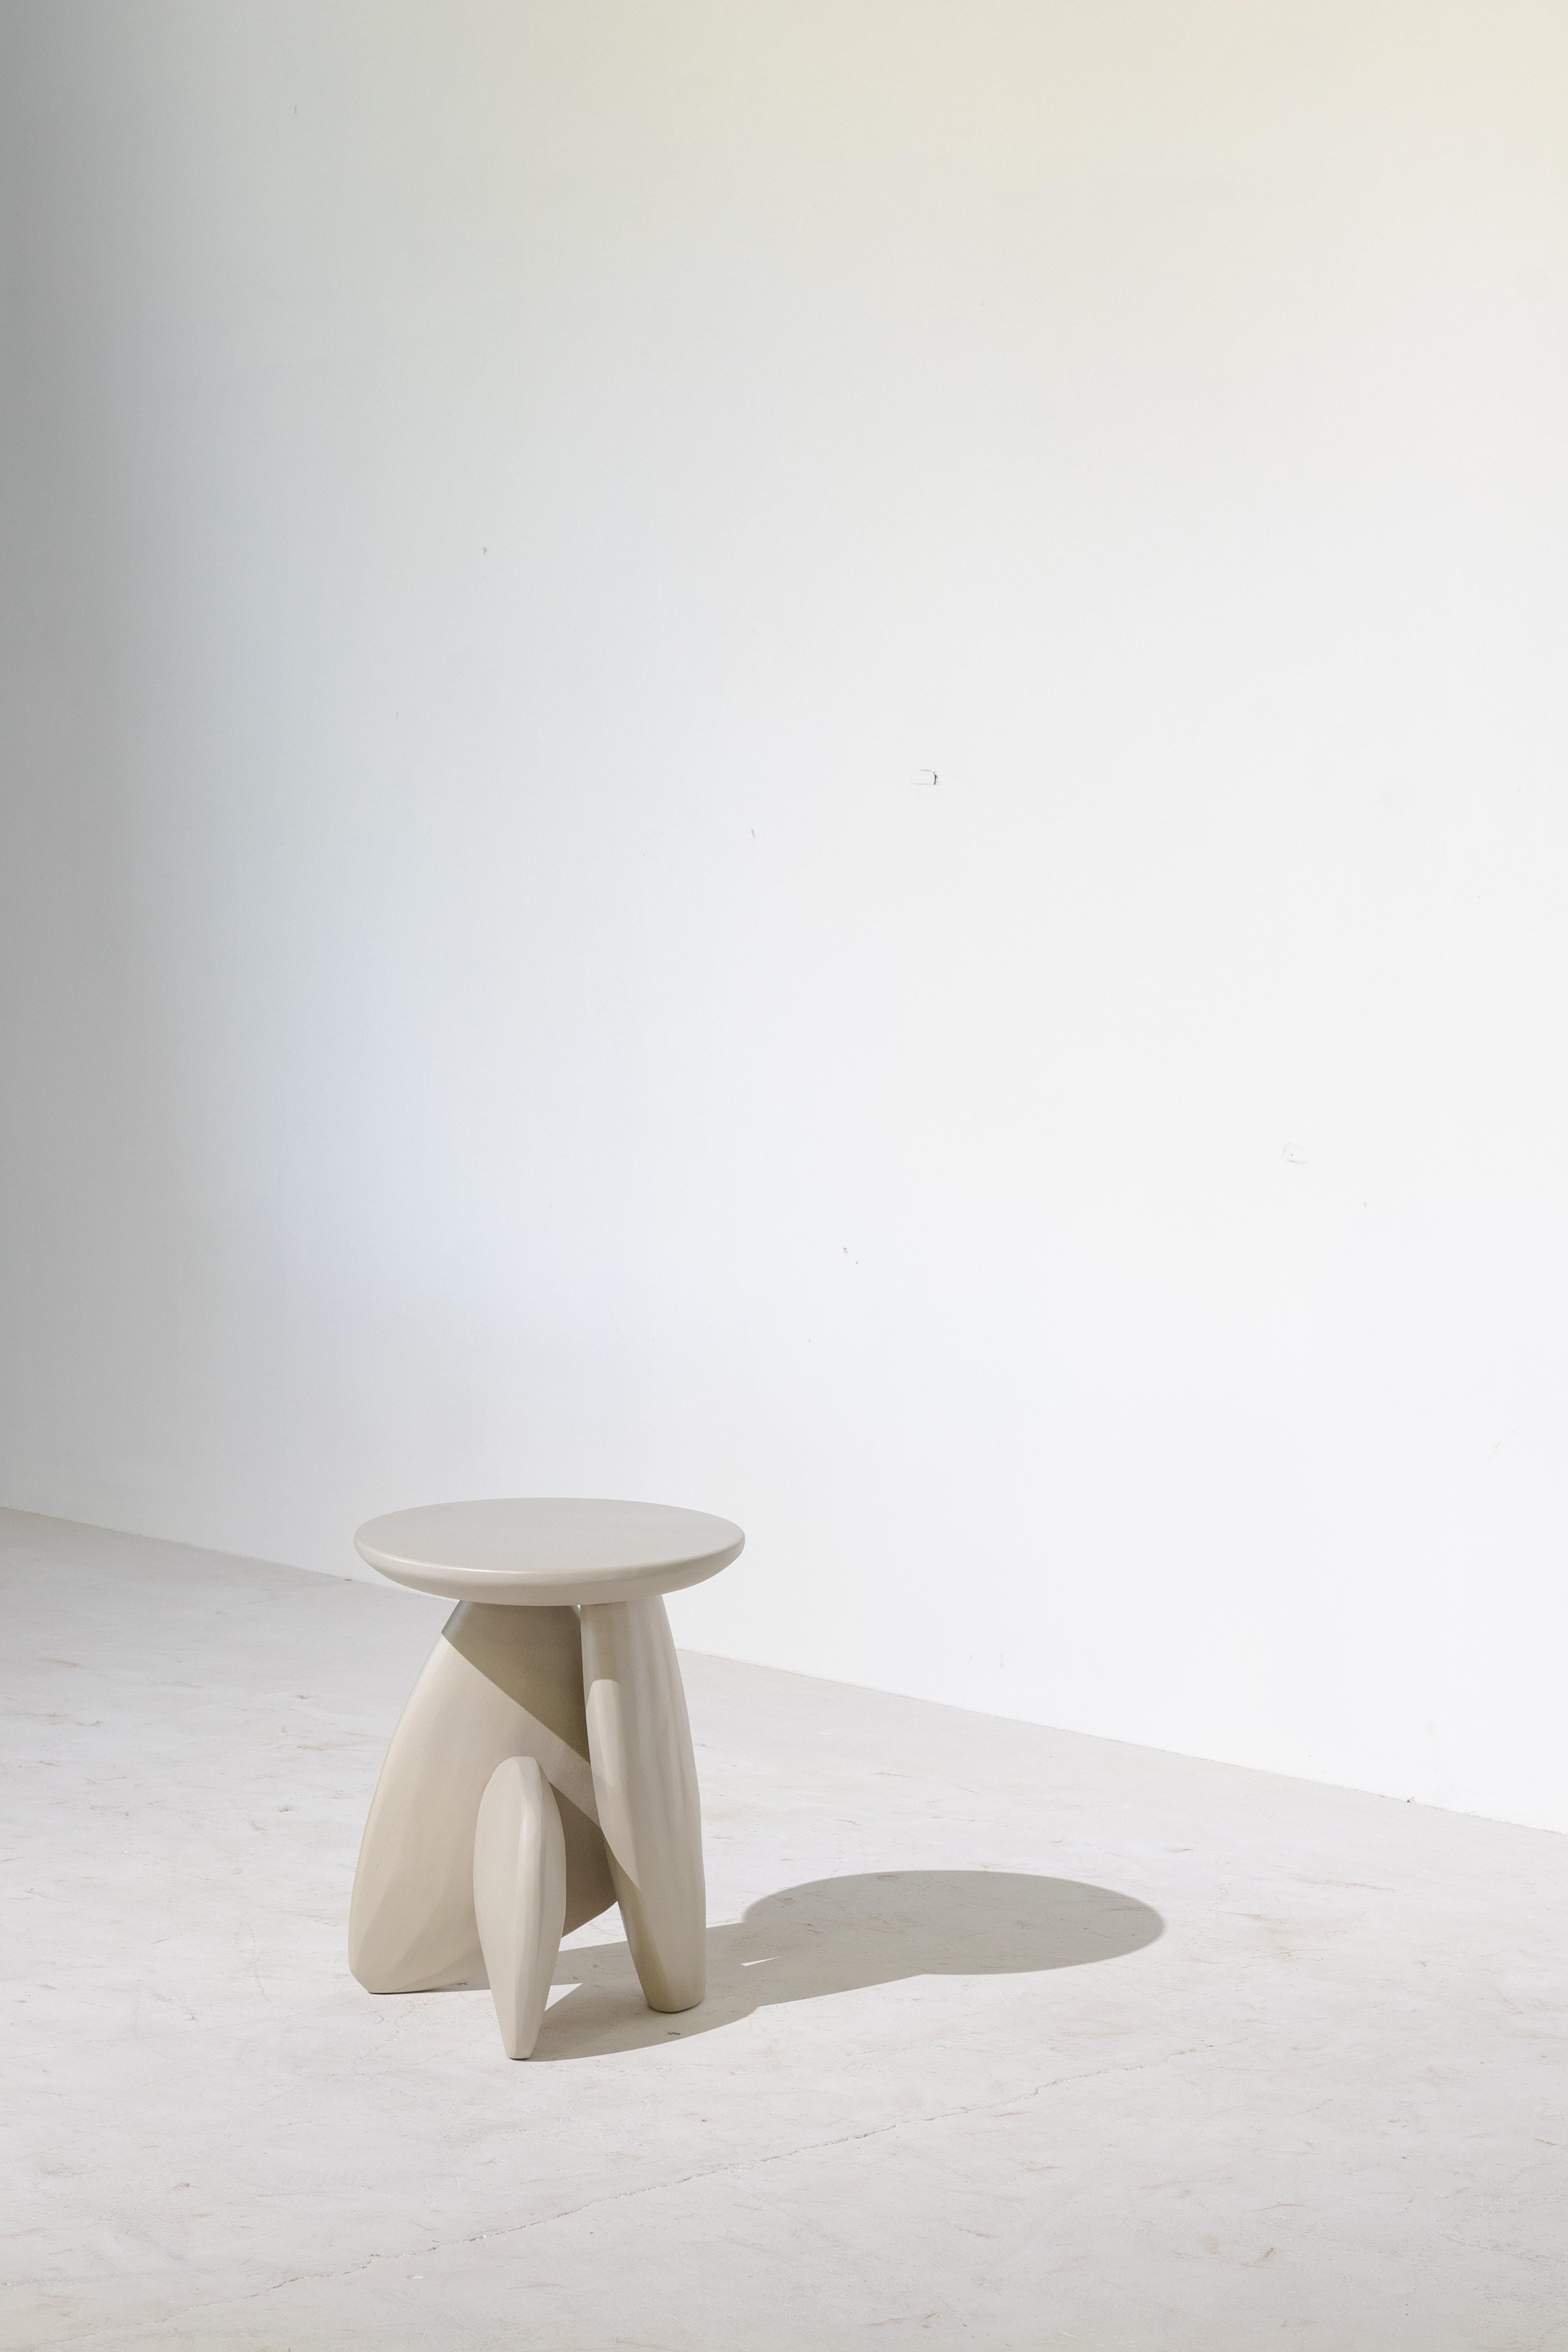 Pebble Stool Type 01, Stone White Wood Finishing In New Condition For Sale In Chiangmai, TH